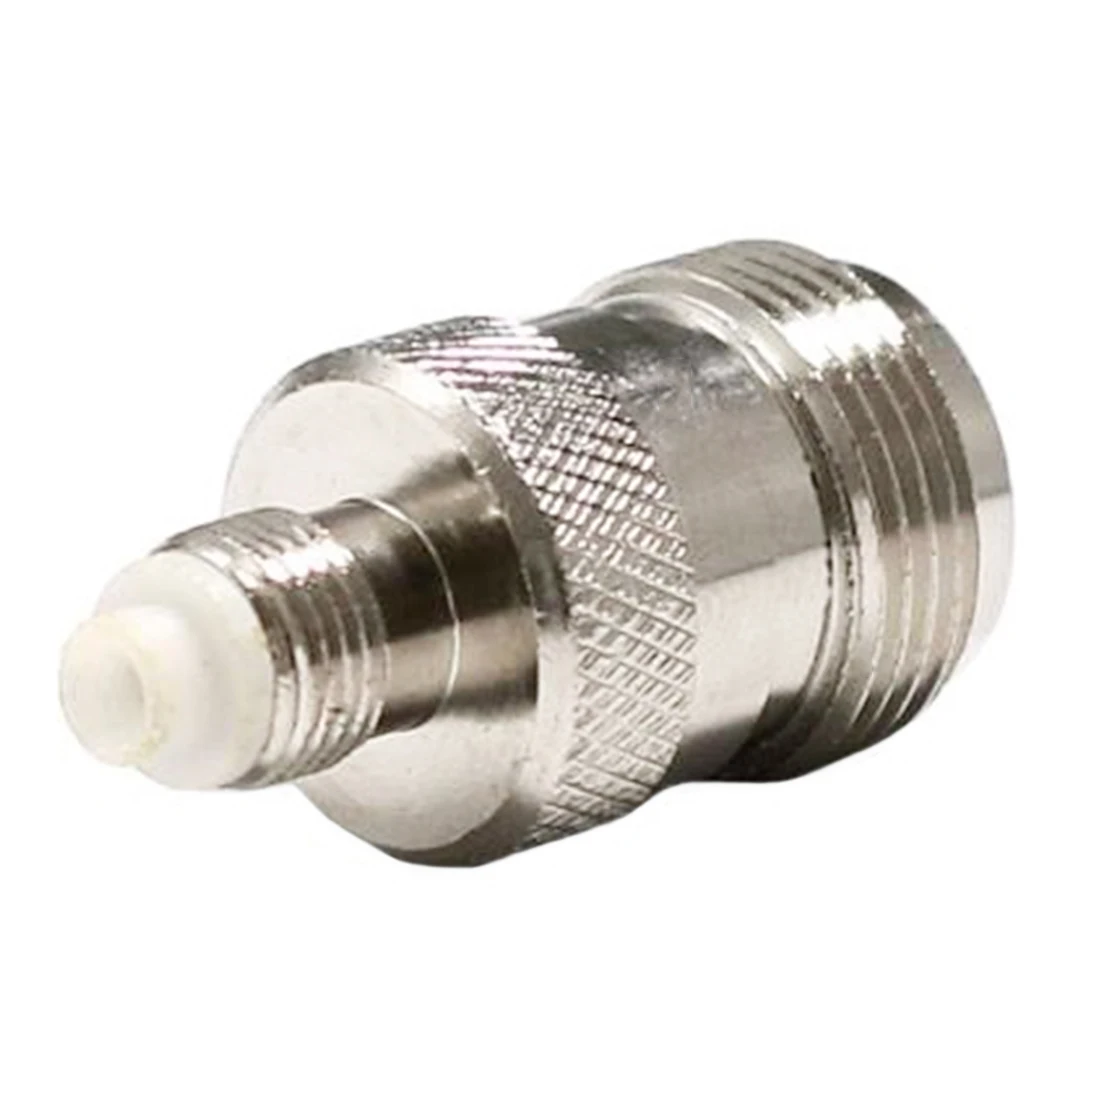 

1pc N Female Male to FME Jack Plug RF Coax Adapter Convertor Straight Nickelplated 50 Ohm New Wholesale